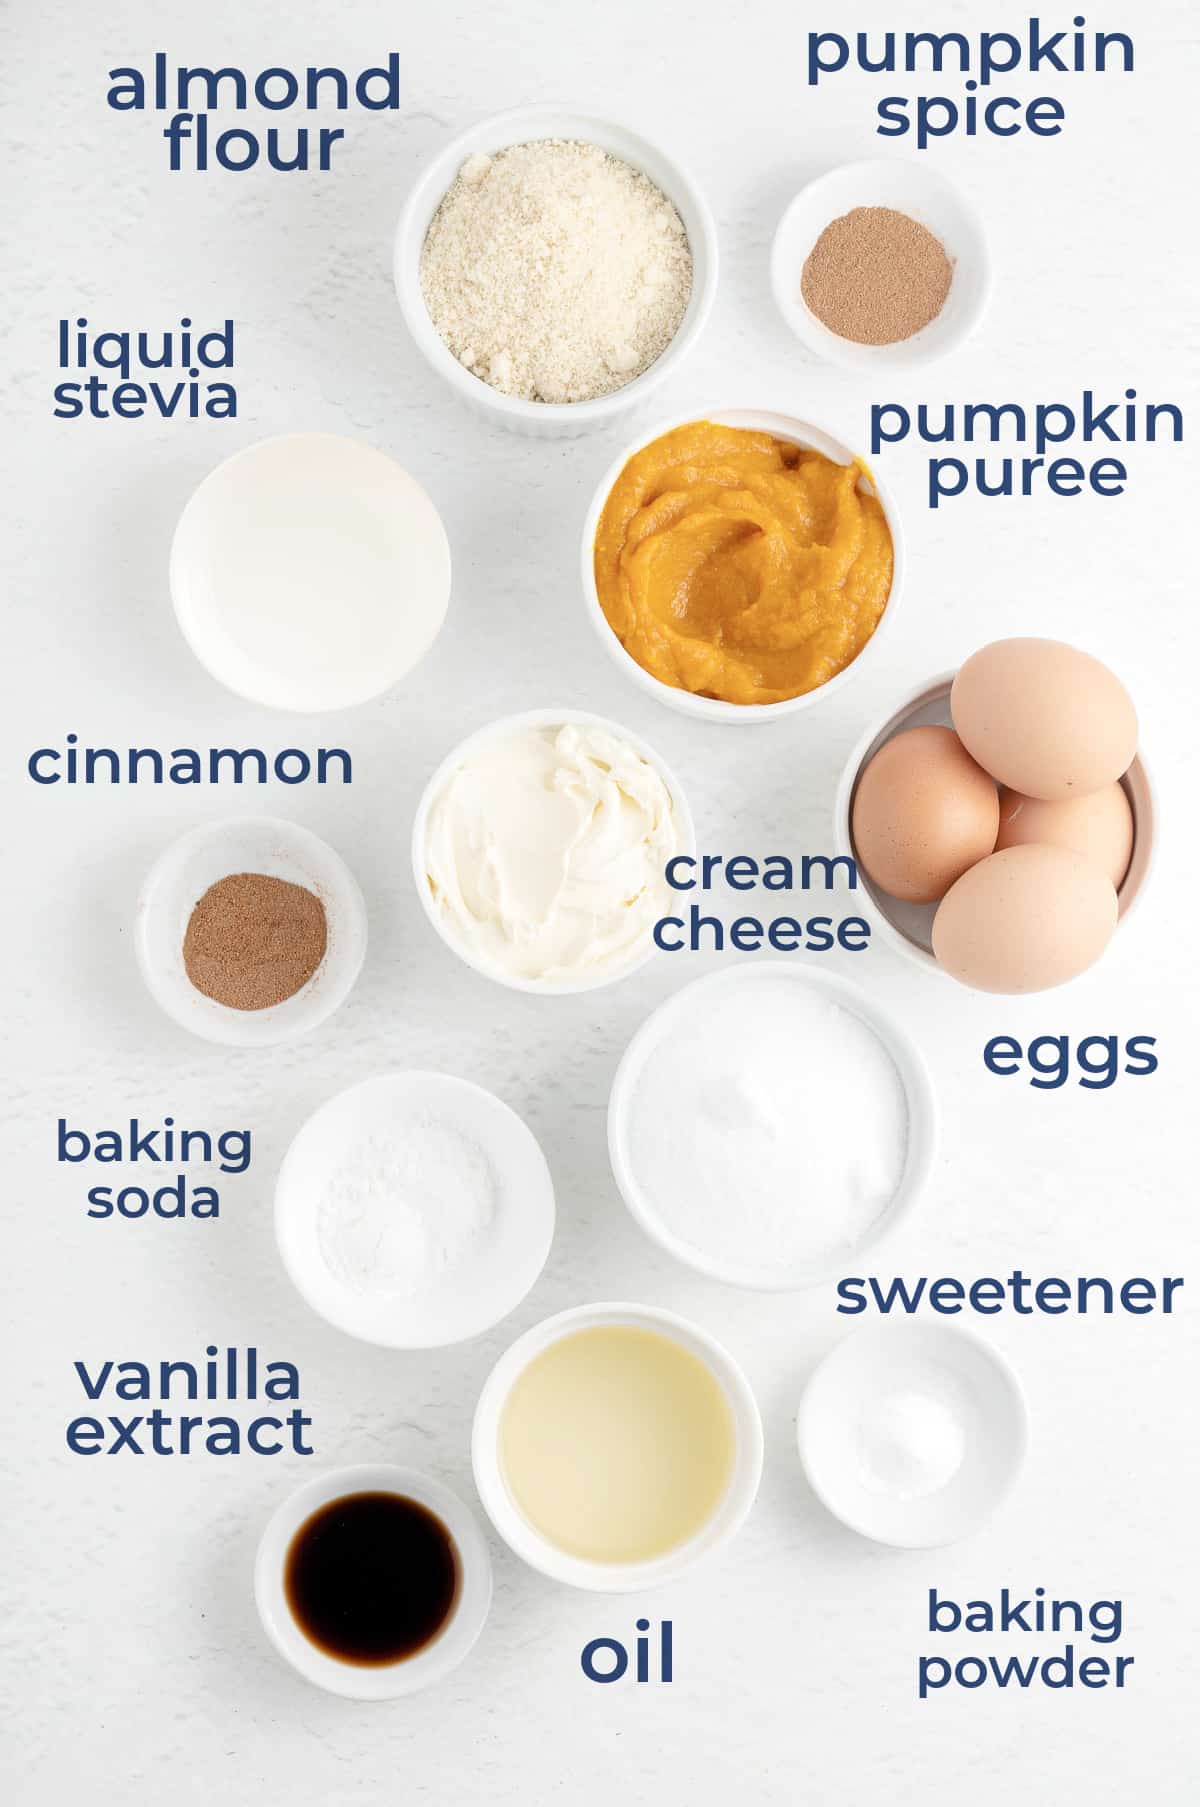 ingredients all laid out in individual containers to make low carb pumpkin cupcakes.